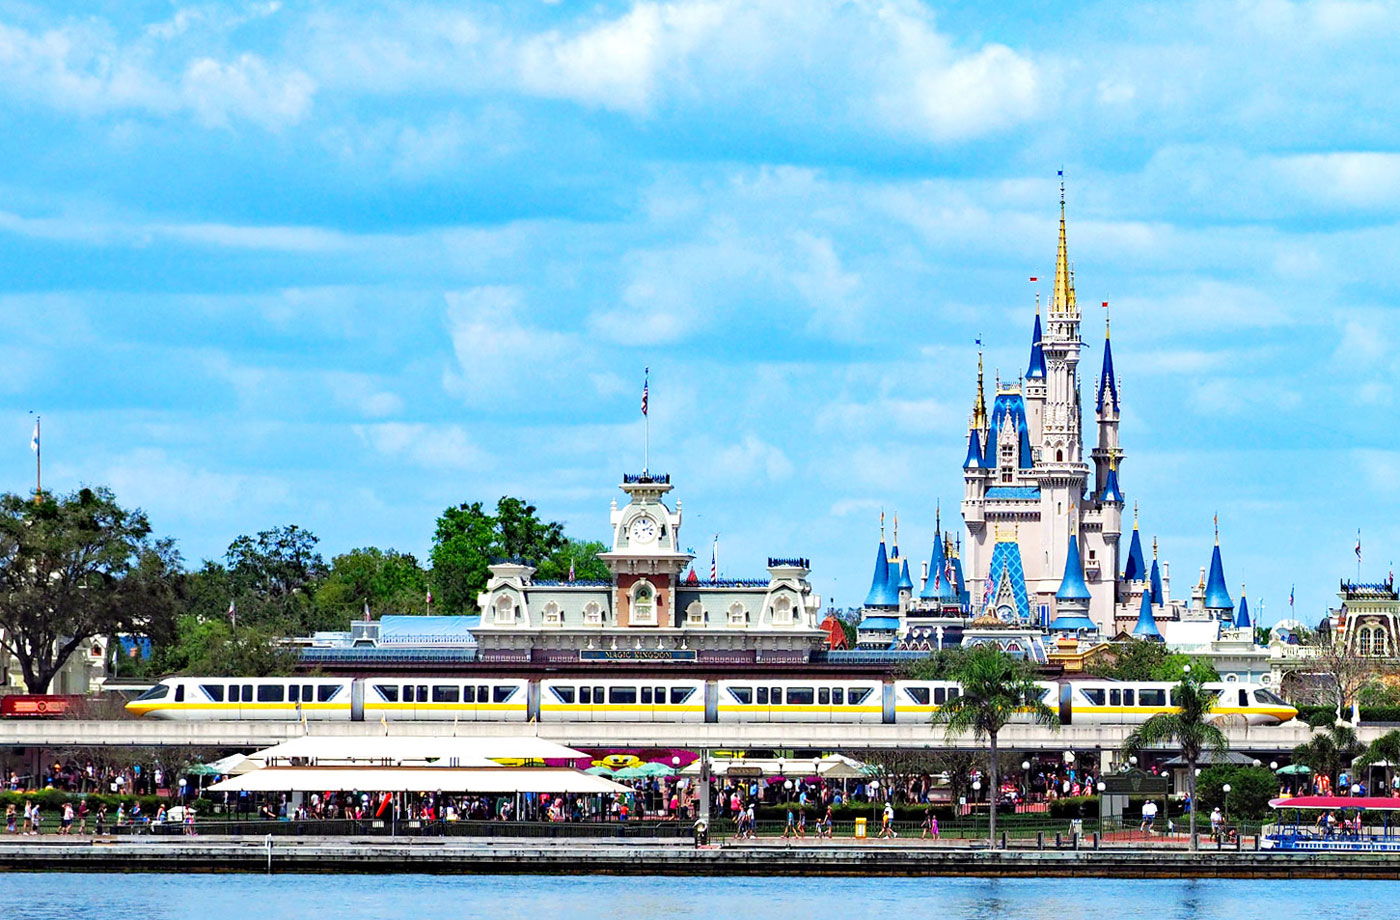 Disney Monorail in front of Magic Kingdom